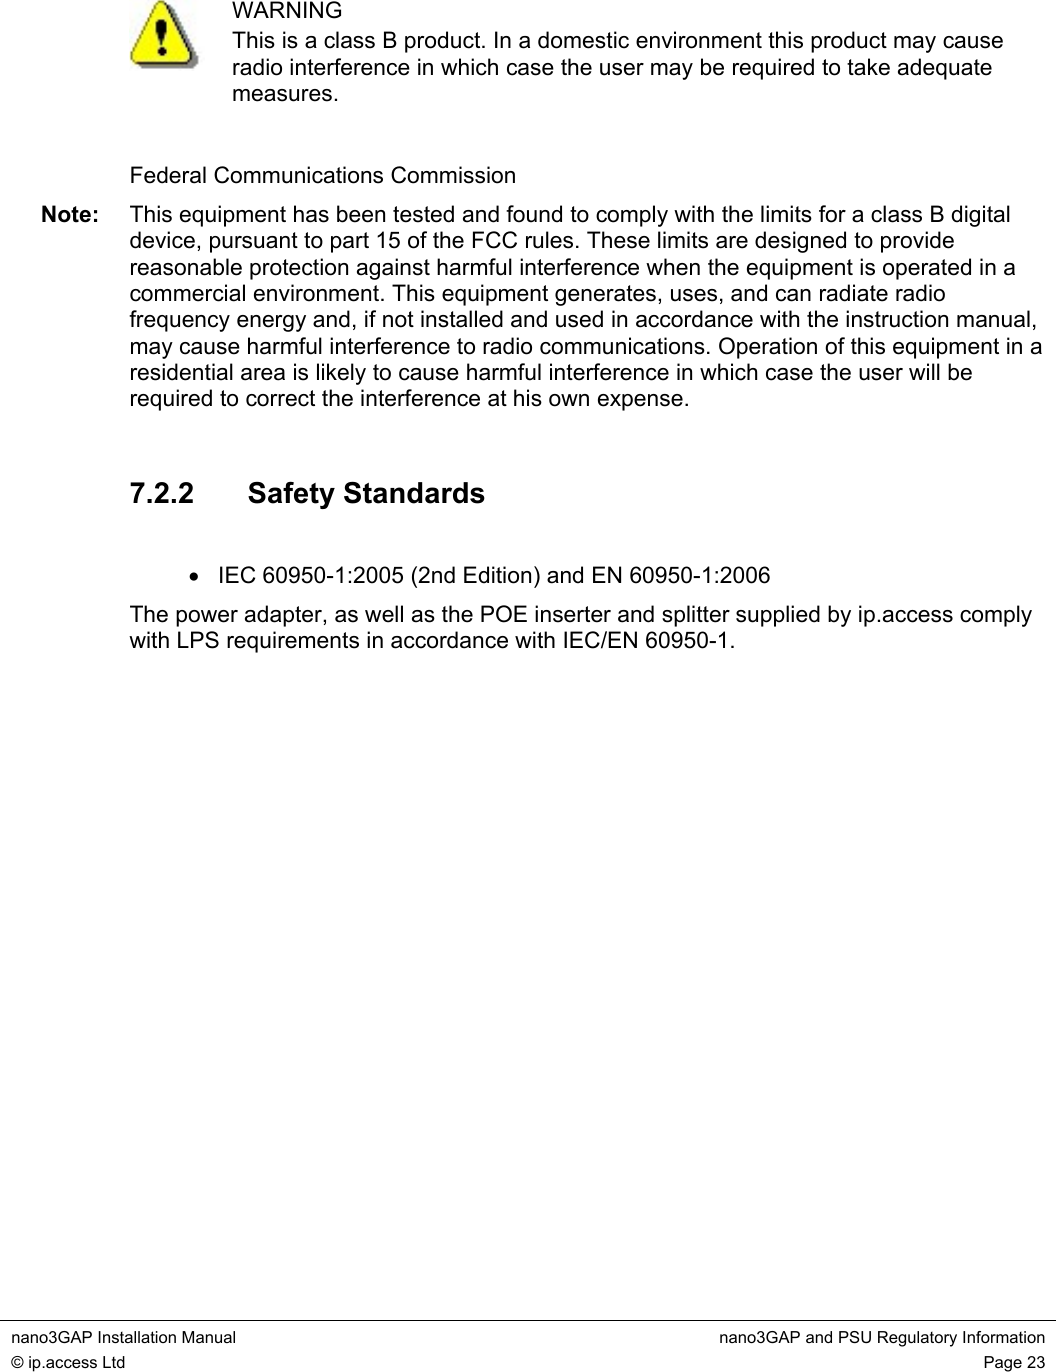  nano3GAP Installation Manual  nano3GAP and PSU Regulatory Information © ip.access Ltd  Page 23    WARNING This is a class B product. In a domestic environment this product may cause radio interference in which case the user may be required to take adequate measures.  Federal Communications Commission Note:  This equipment has been tested and found to comply with the limits for a class B digital device, pursuant to part 15 of the FCC rules. These limits are designed to provide reasonable protection against harmful interference when the equipment is operated in a commercial environment. This equipment generates, uses, and can radiate radio frequency energy and, if not installed and used in accordance with the instruction manual, may cause harmful interference to radio communications. Operation of this equipment in a residential area is likely to cause harmful interference in which case the user will be required to correct the interference at his own expense.  7.2.2  Safety Standards  •  IEC 60950-1:2005 (2nd Edition) and EN 60950-1:2006 The power adapter, as well as the POE inserter and splitter supplied by ip.access comply with LPS requirements in accordance with IEC/EN 60950-1.   